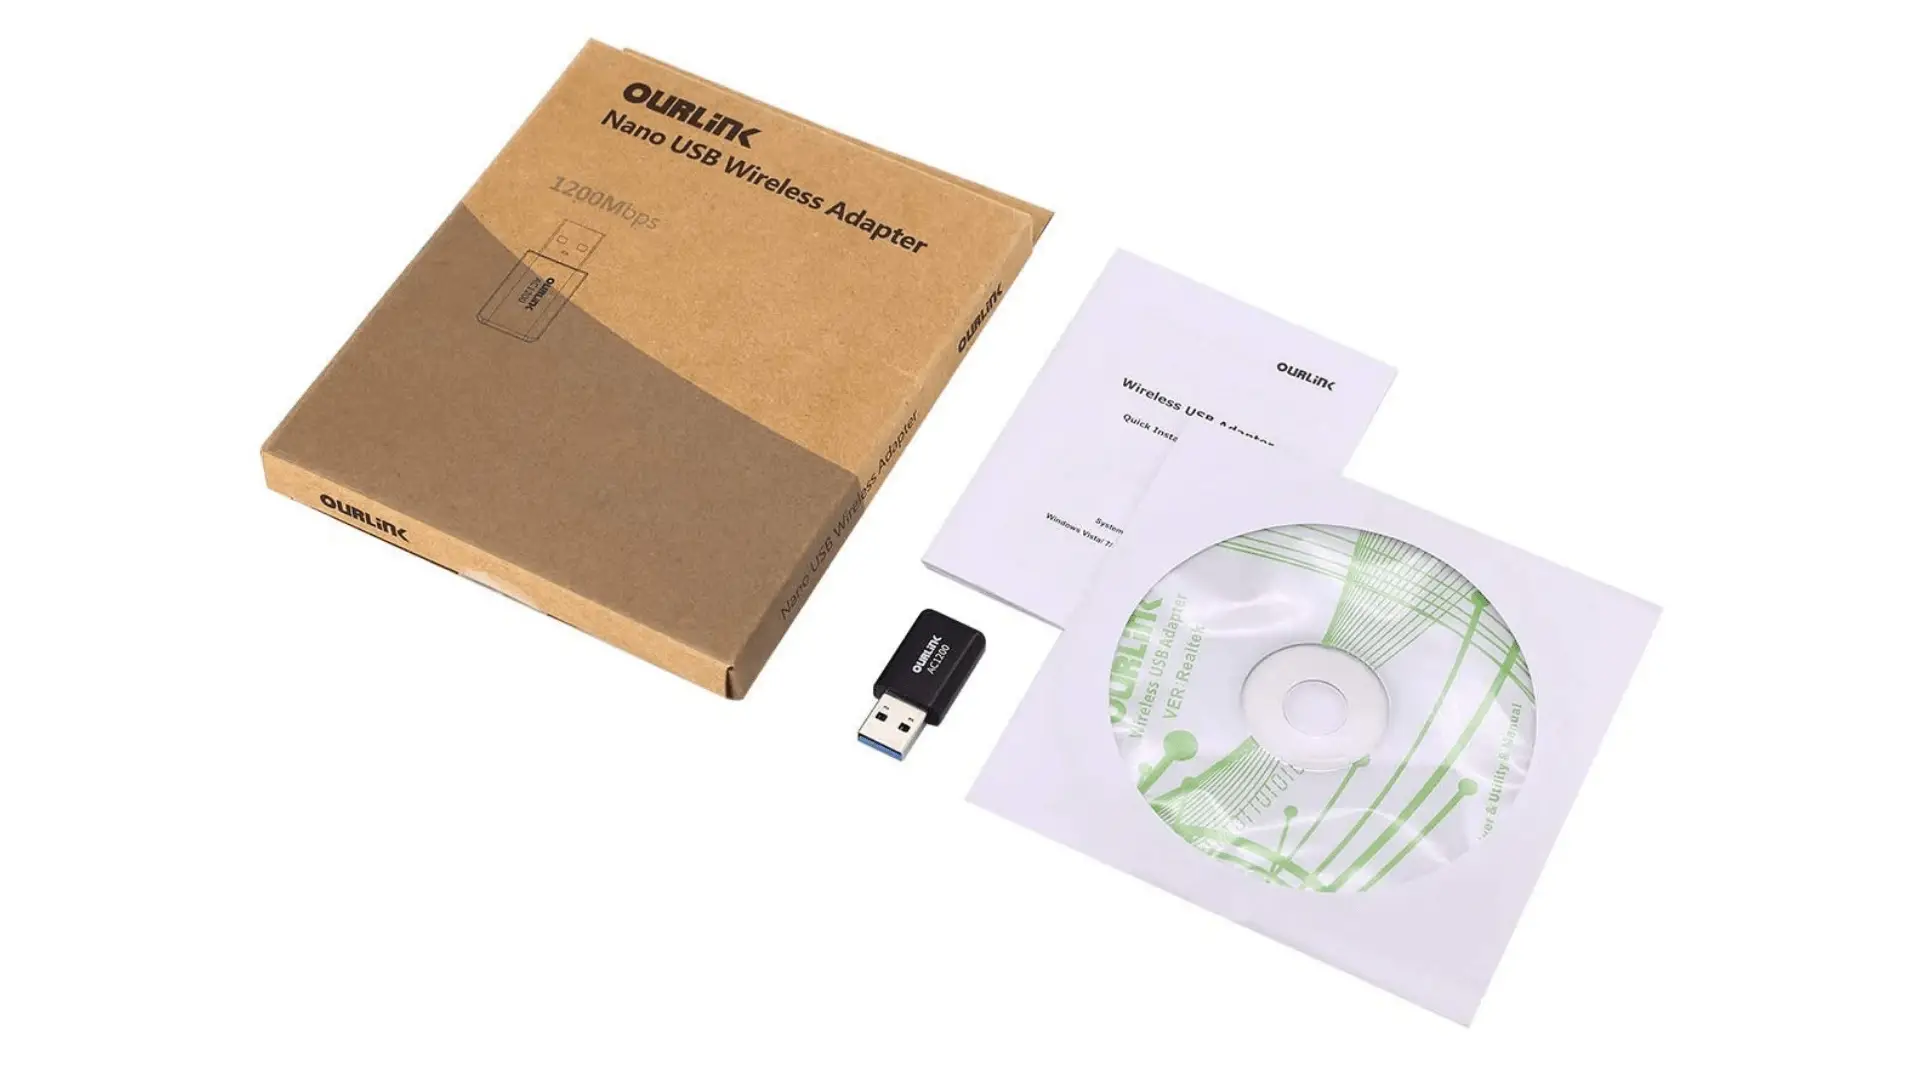 OurLink’s Glam Hobby USB WiFi Adapter with a CD installation guide and USB manual. 